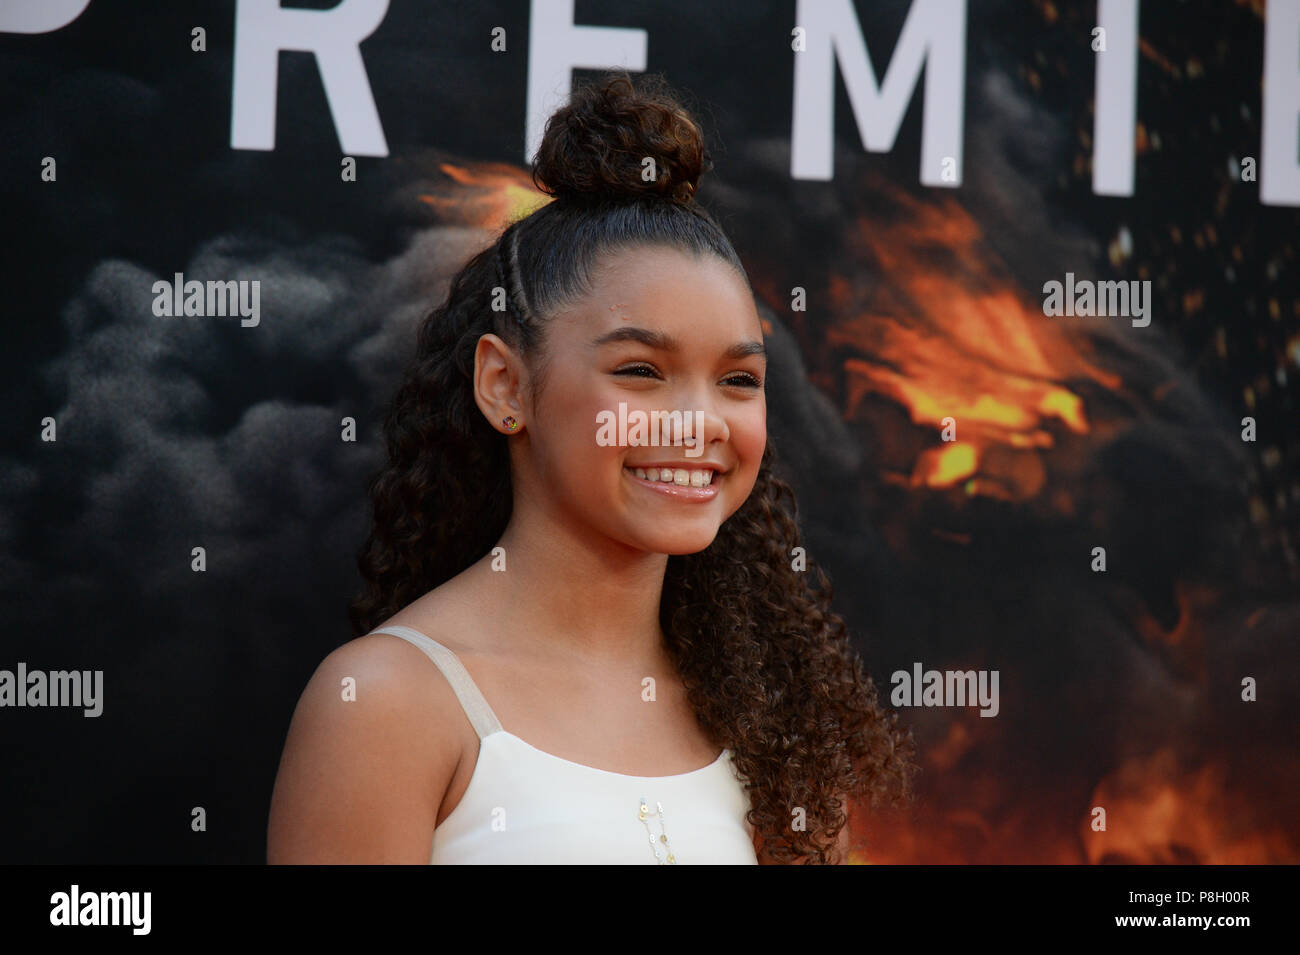 New York, USA. 10th July 2018. McKenna Roberts attends the 'Skyscraper' New York premiere at AMC Loews Lincoln Square on July 10, 2018 in New York City. Credit: Erik Pendzich/Alamy Live News Stock Photo